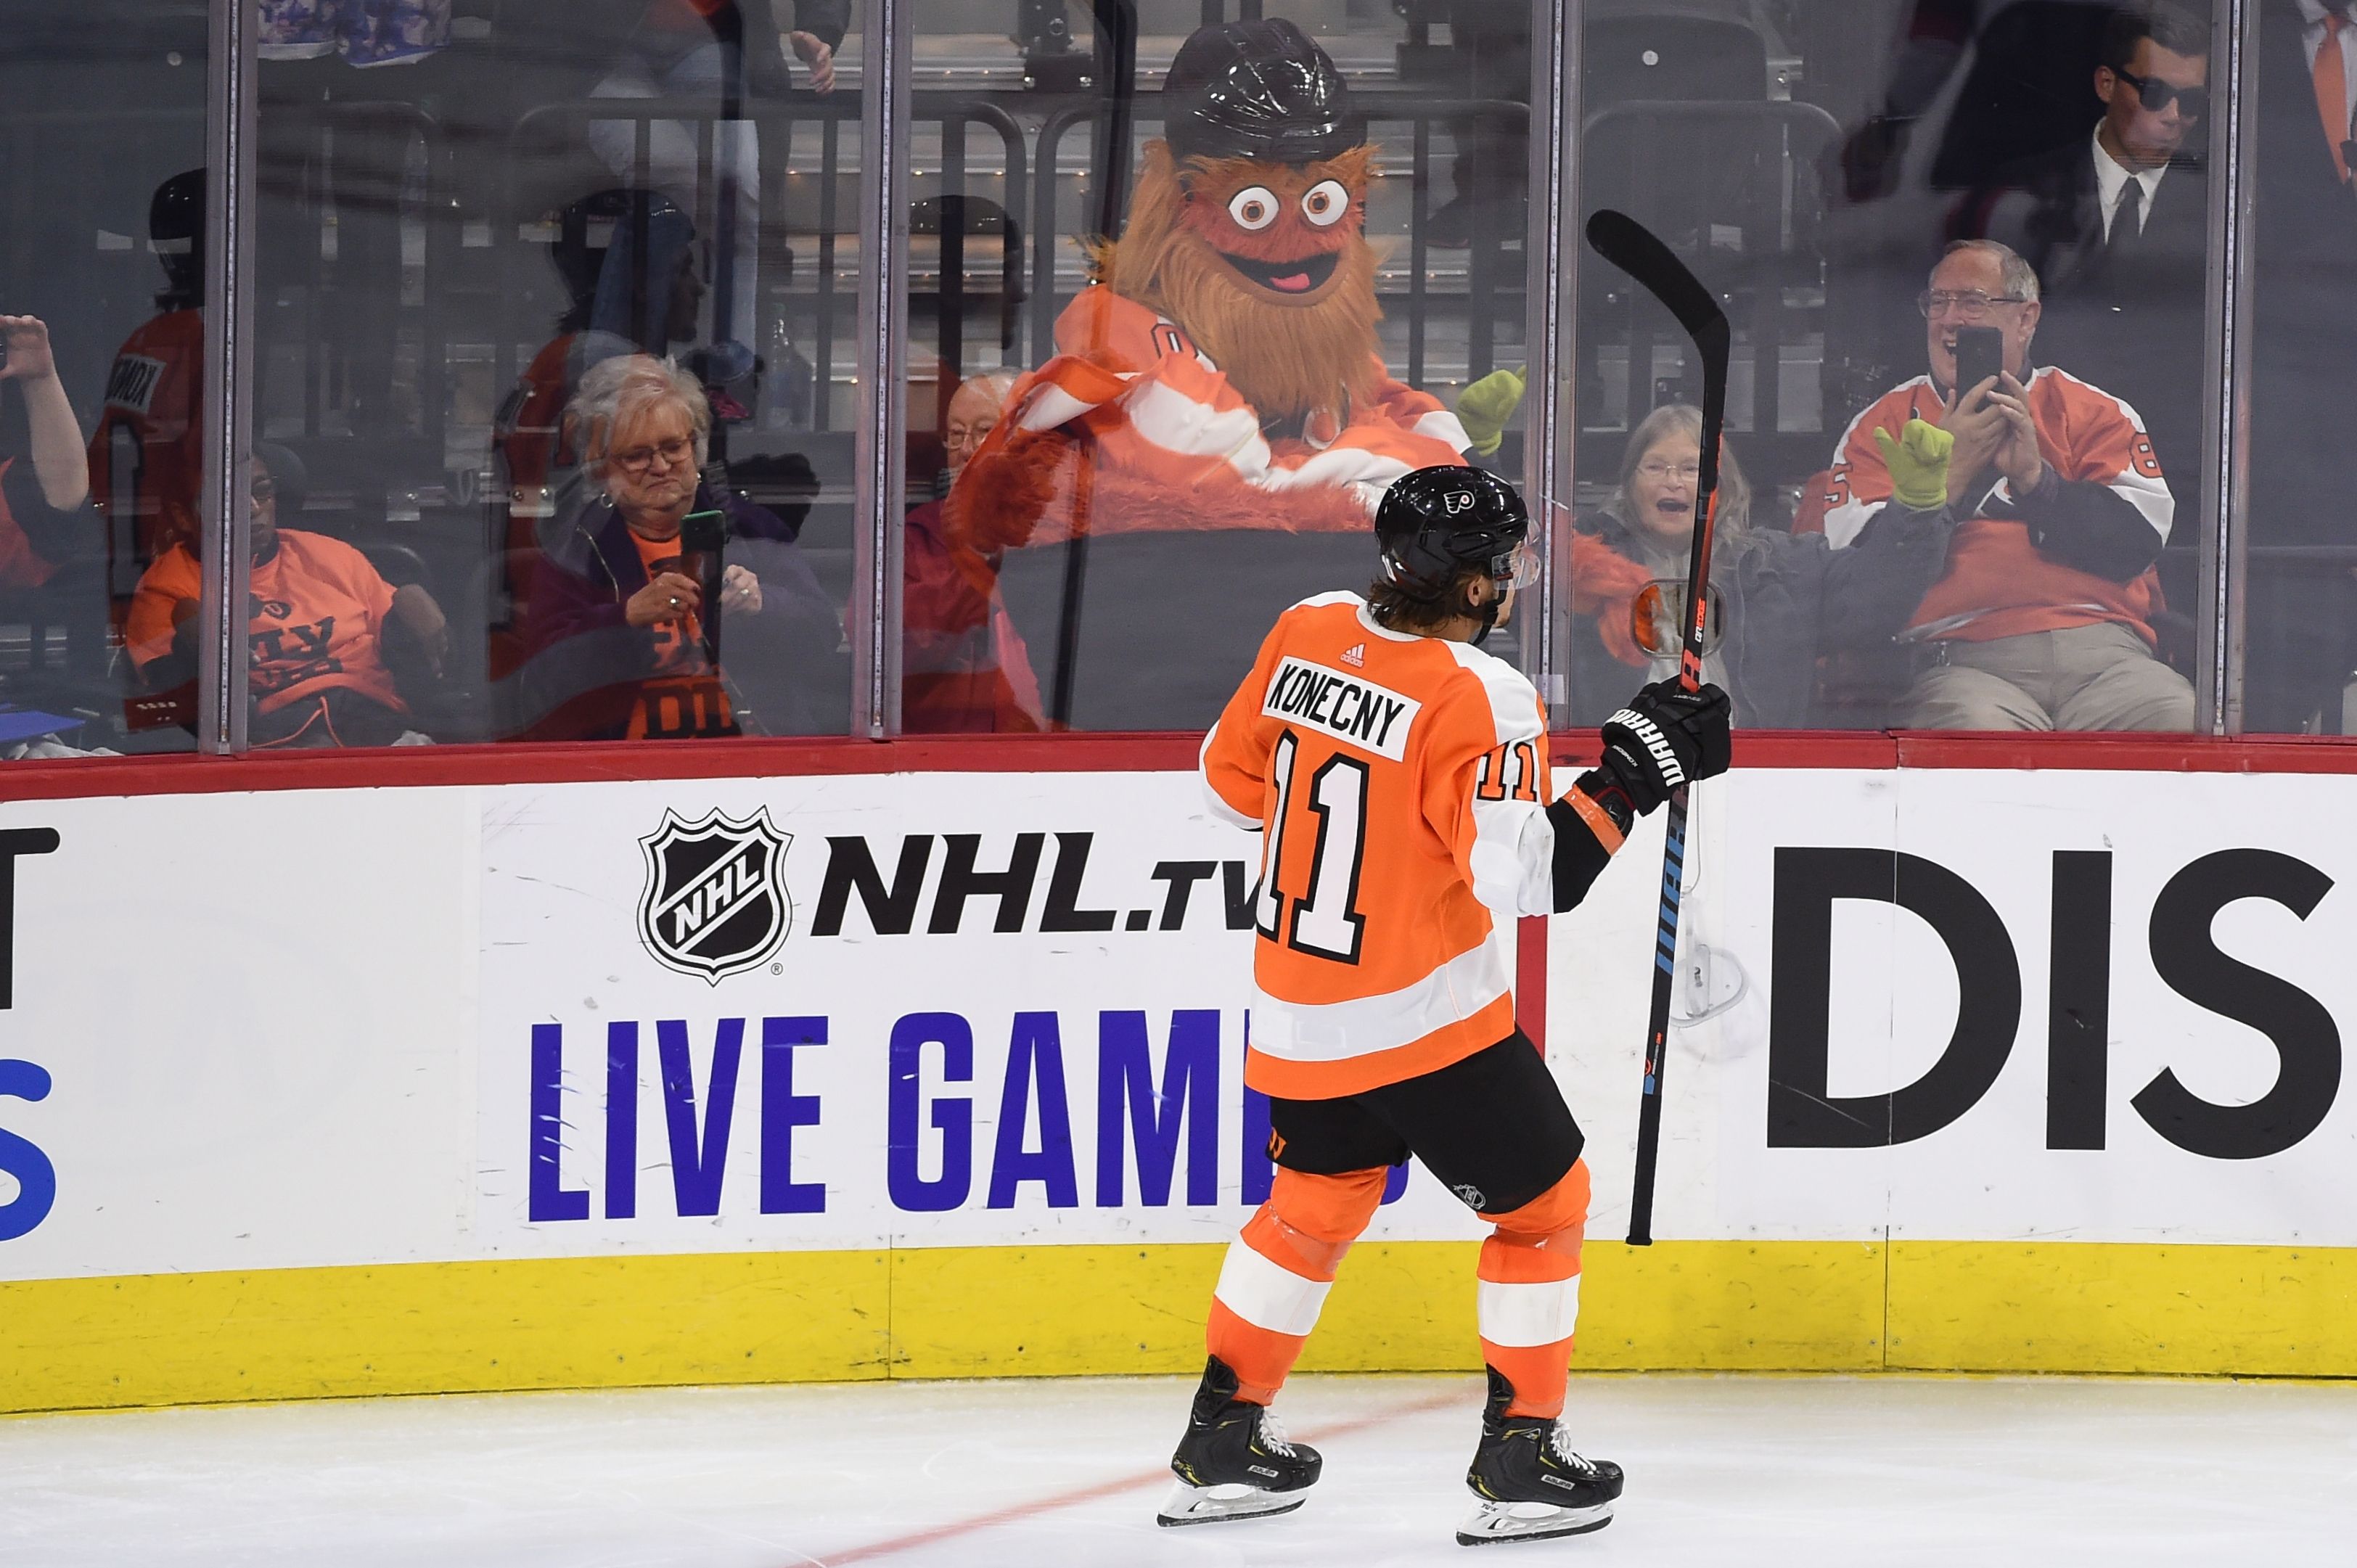 The Philadelphia Flyers Built a 'Rage Room' Where Angry Fans Can Vent